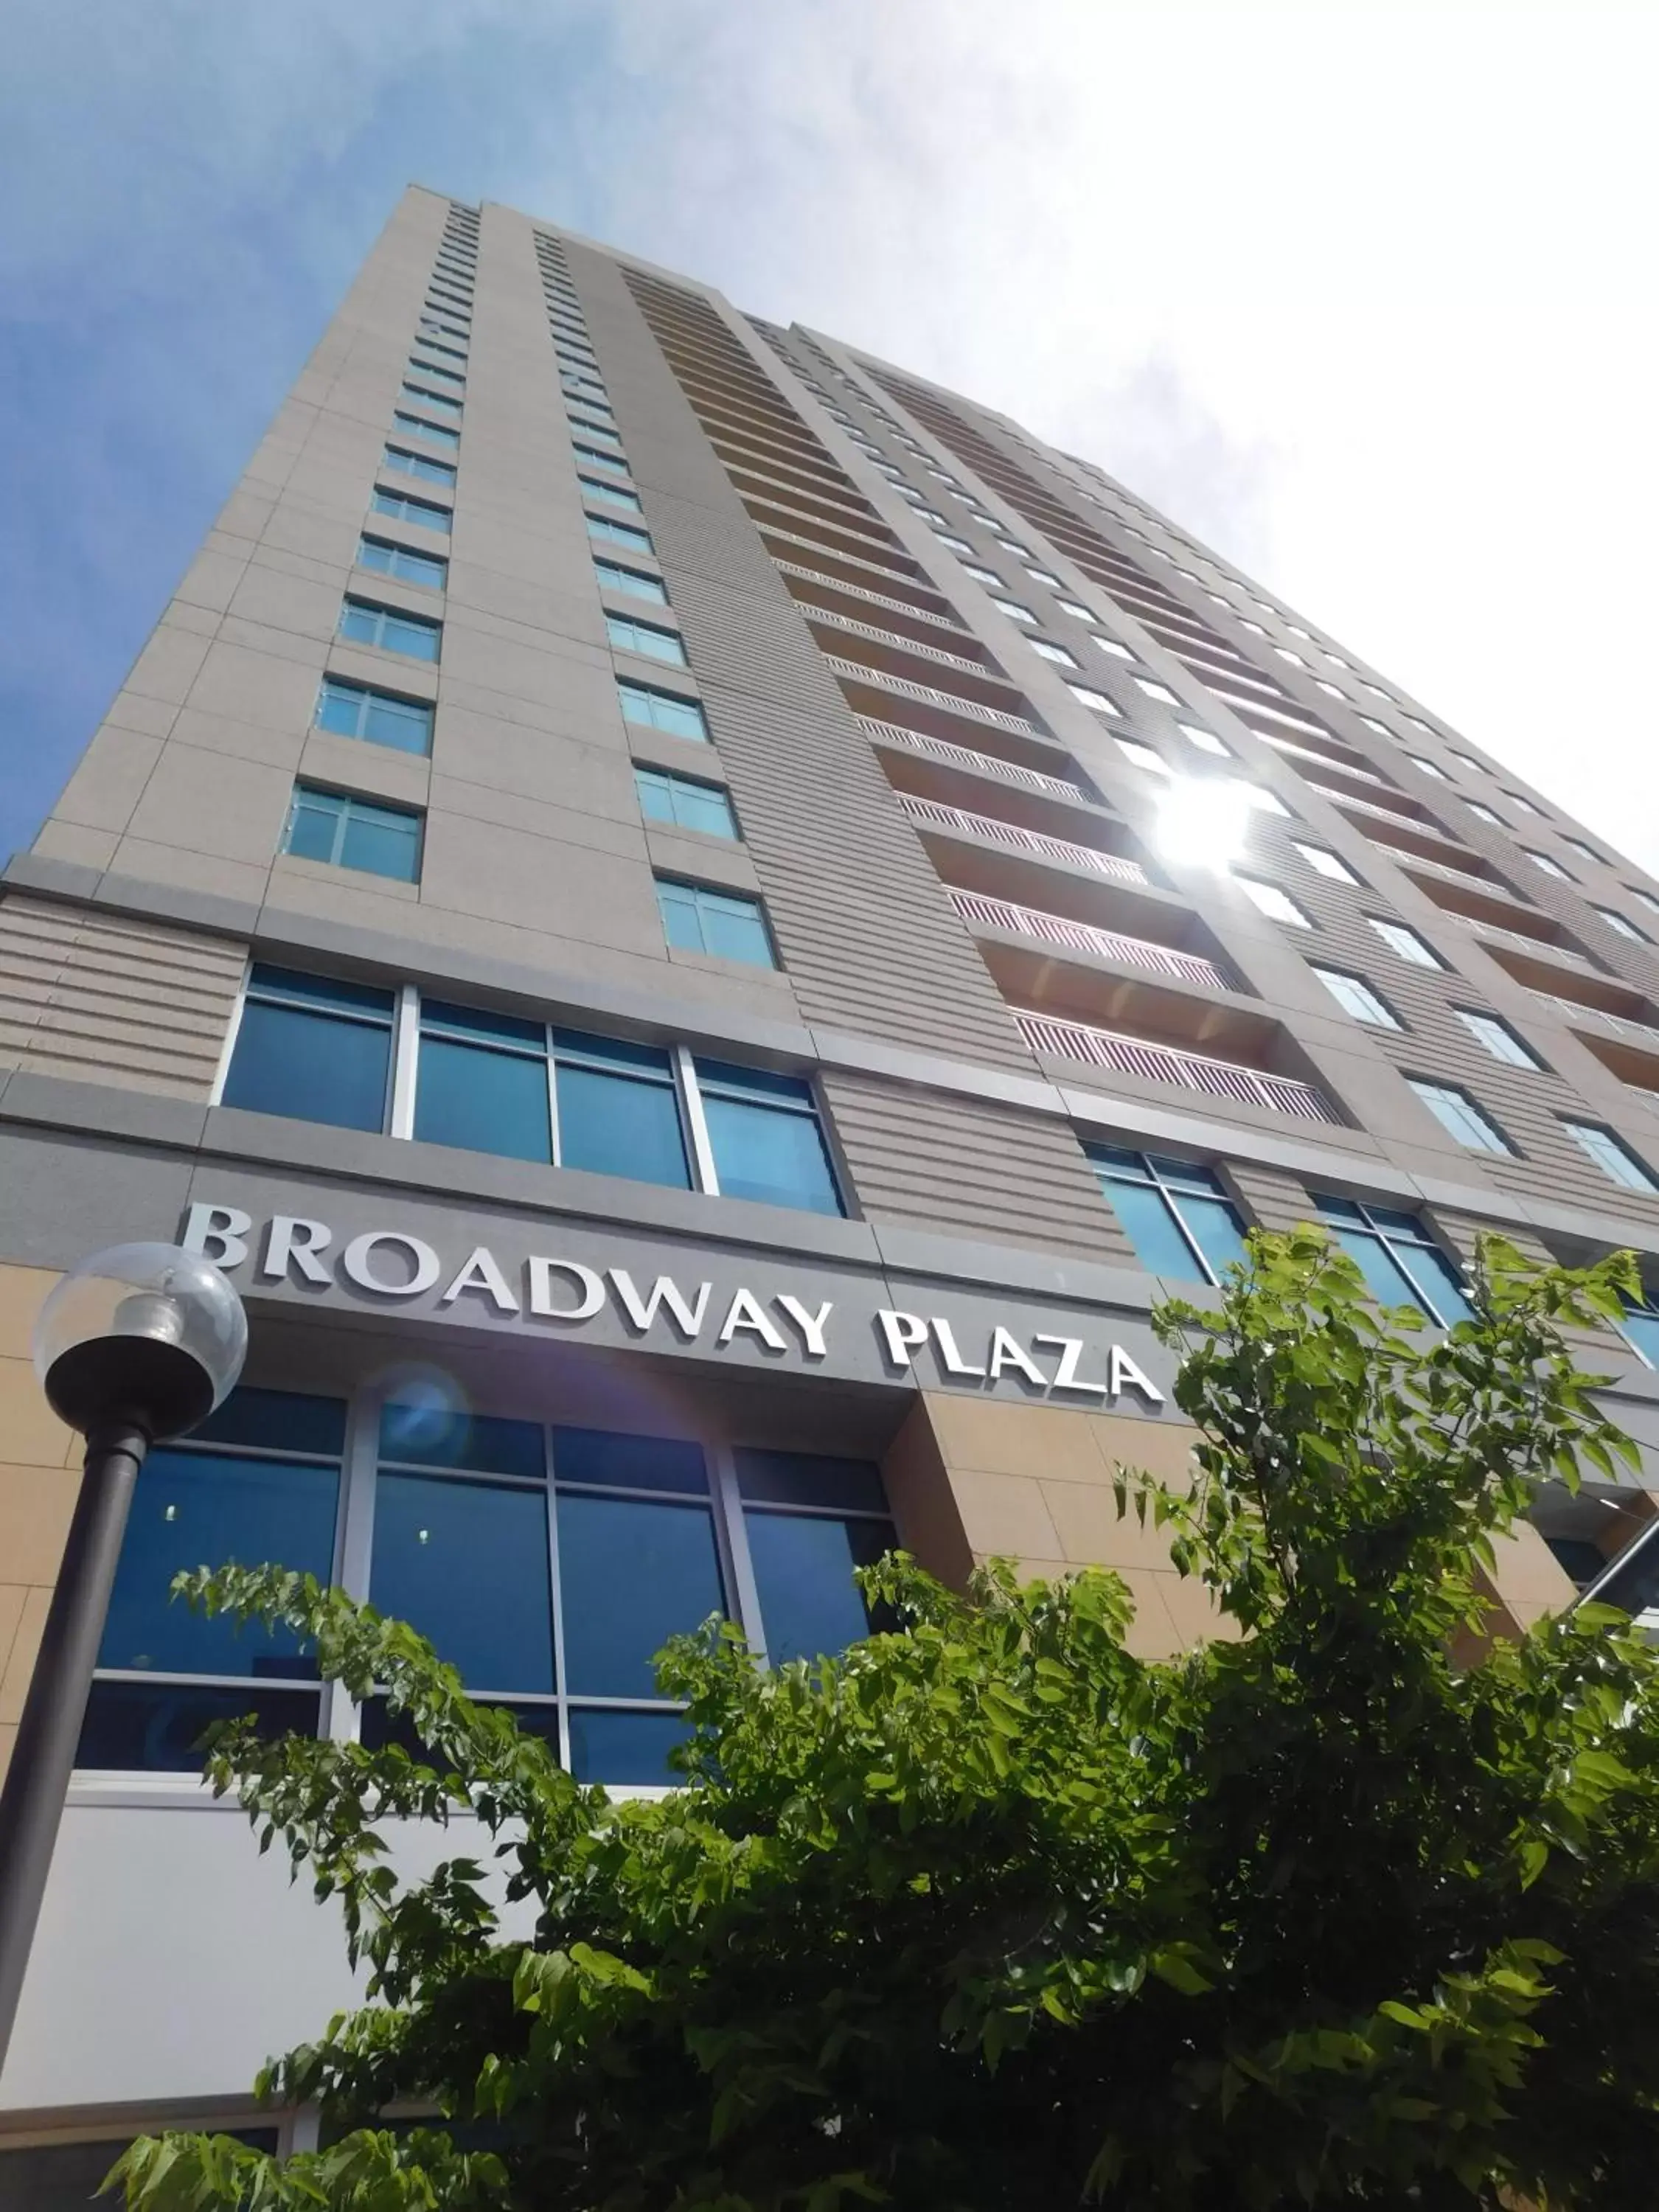 Property Building in Broadway Plaza, Trademark Collection by Wyndham